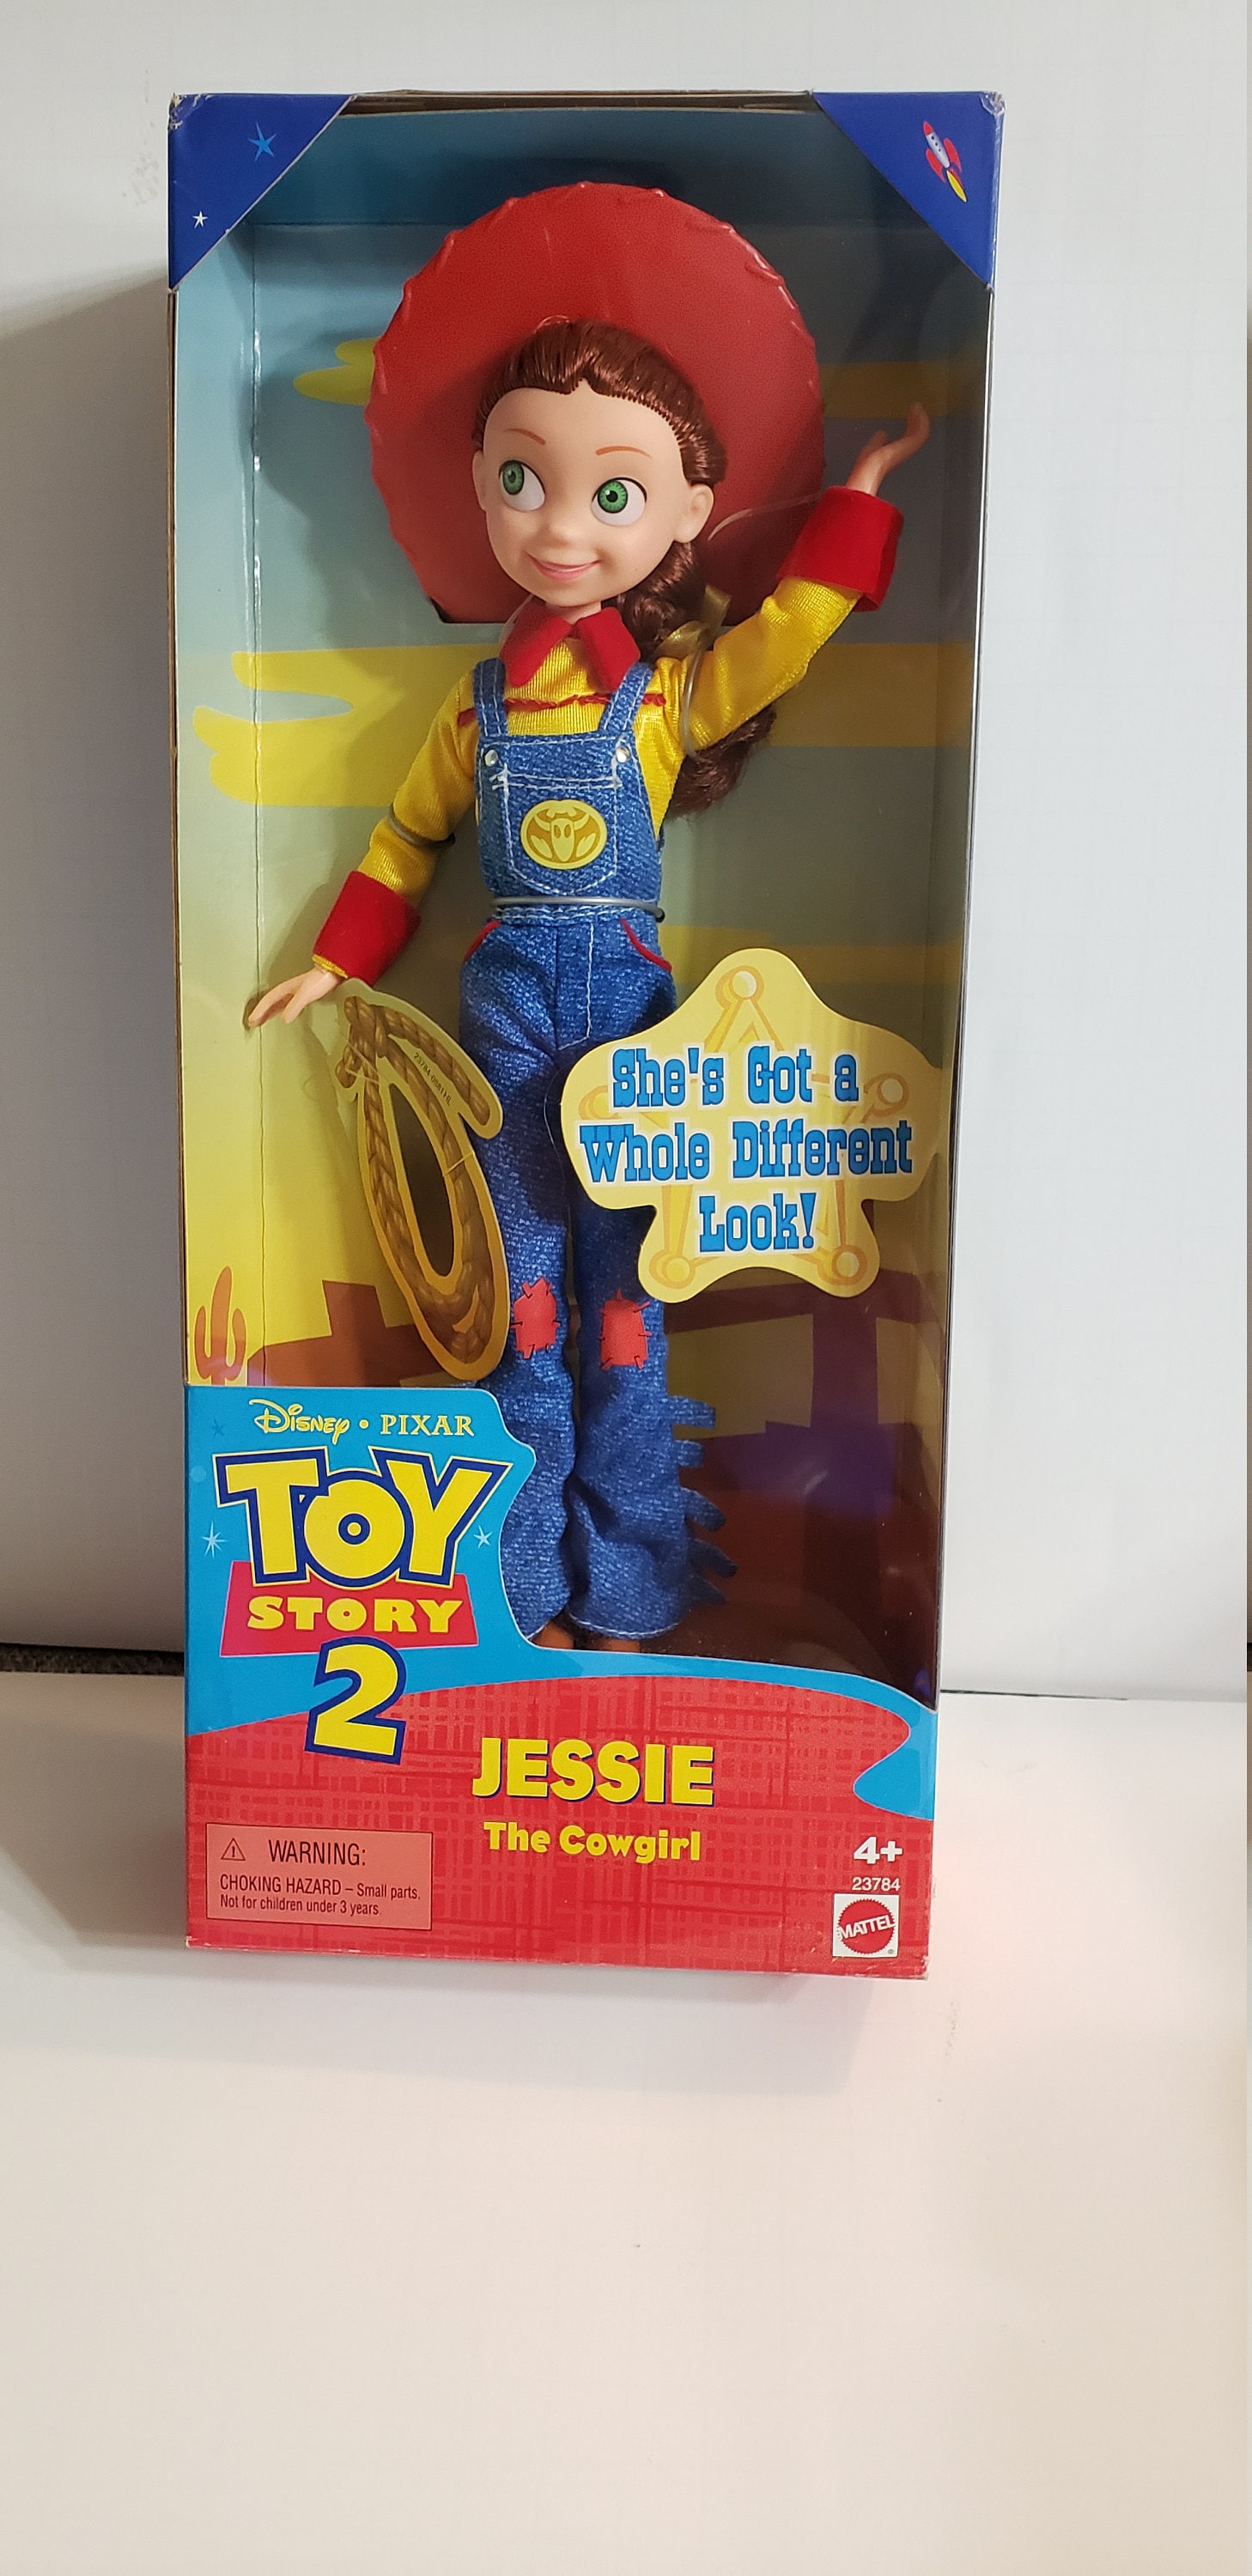 JESSIE THE COWGIRL MINT IN BAG PEZ FROM TOY STORY WOODY'S GIRLFRIEND 